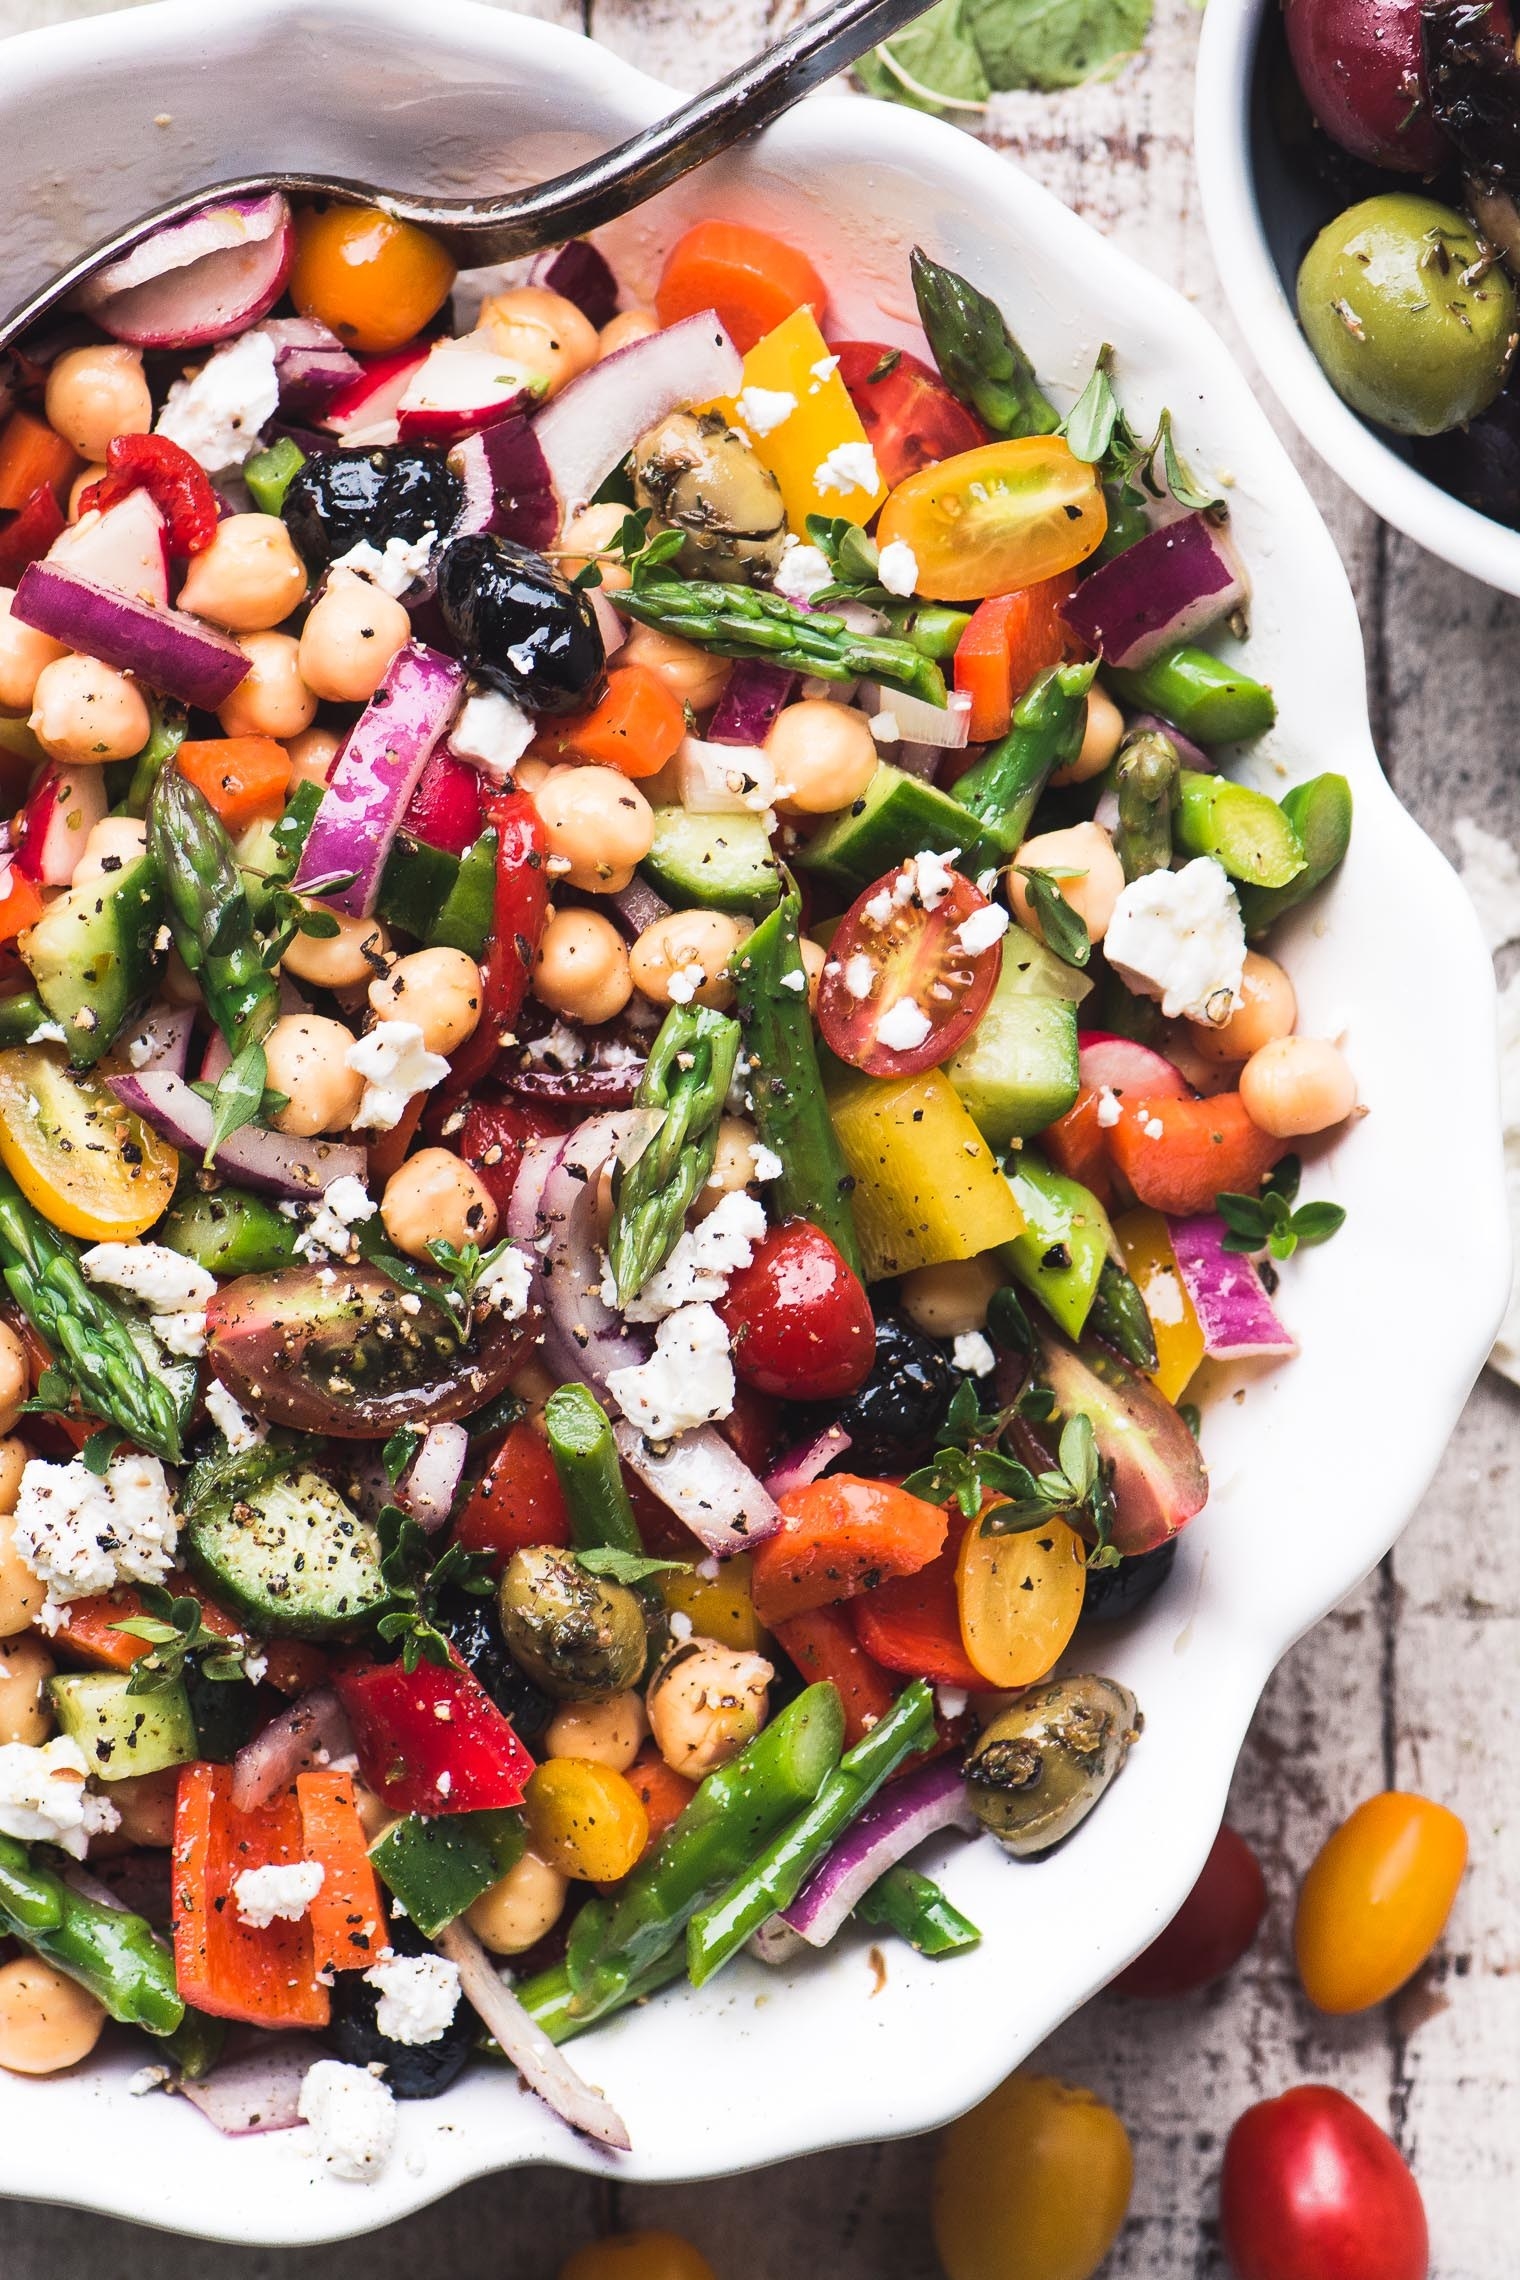 Asparagus salad with colorful vegetables, chickpeas, and Feta